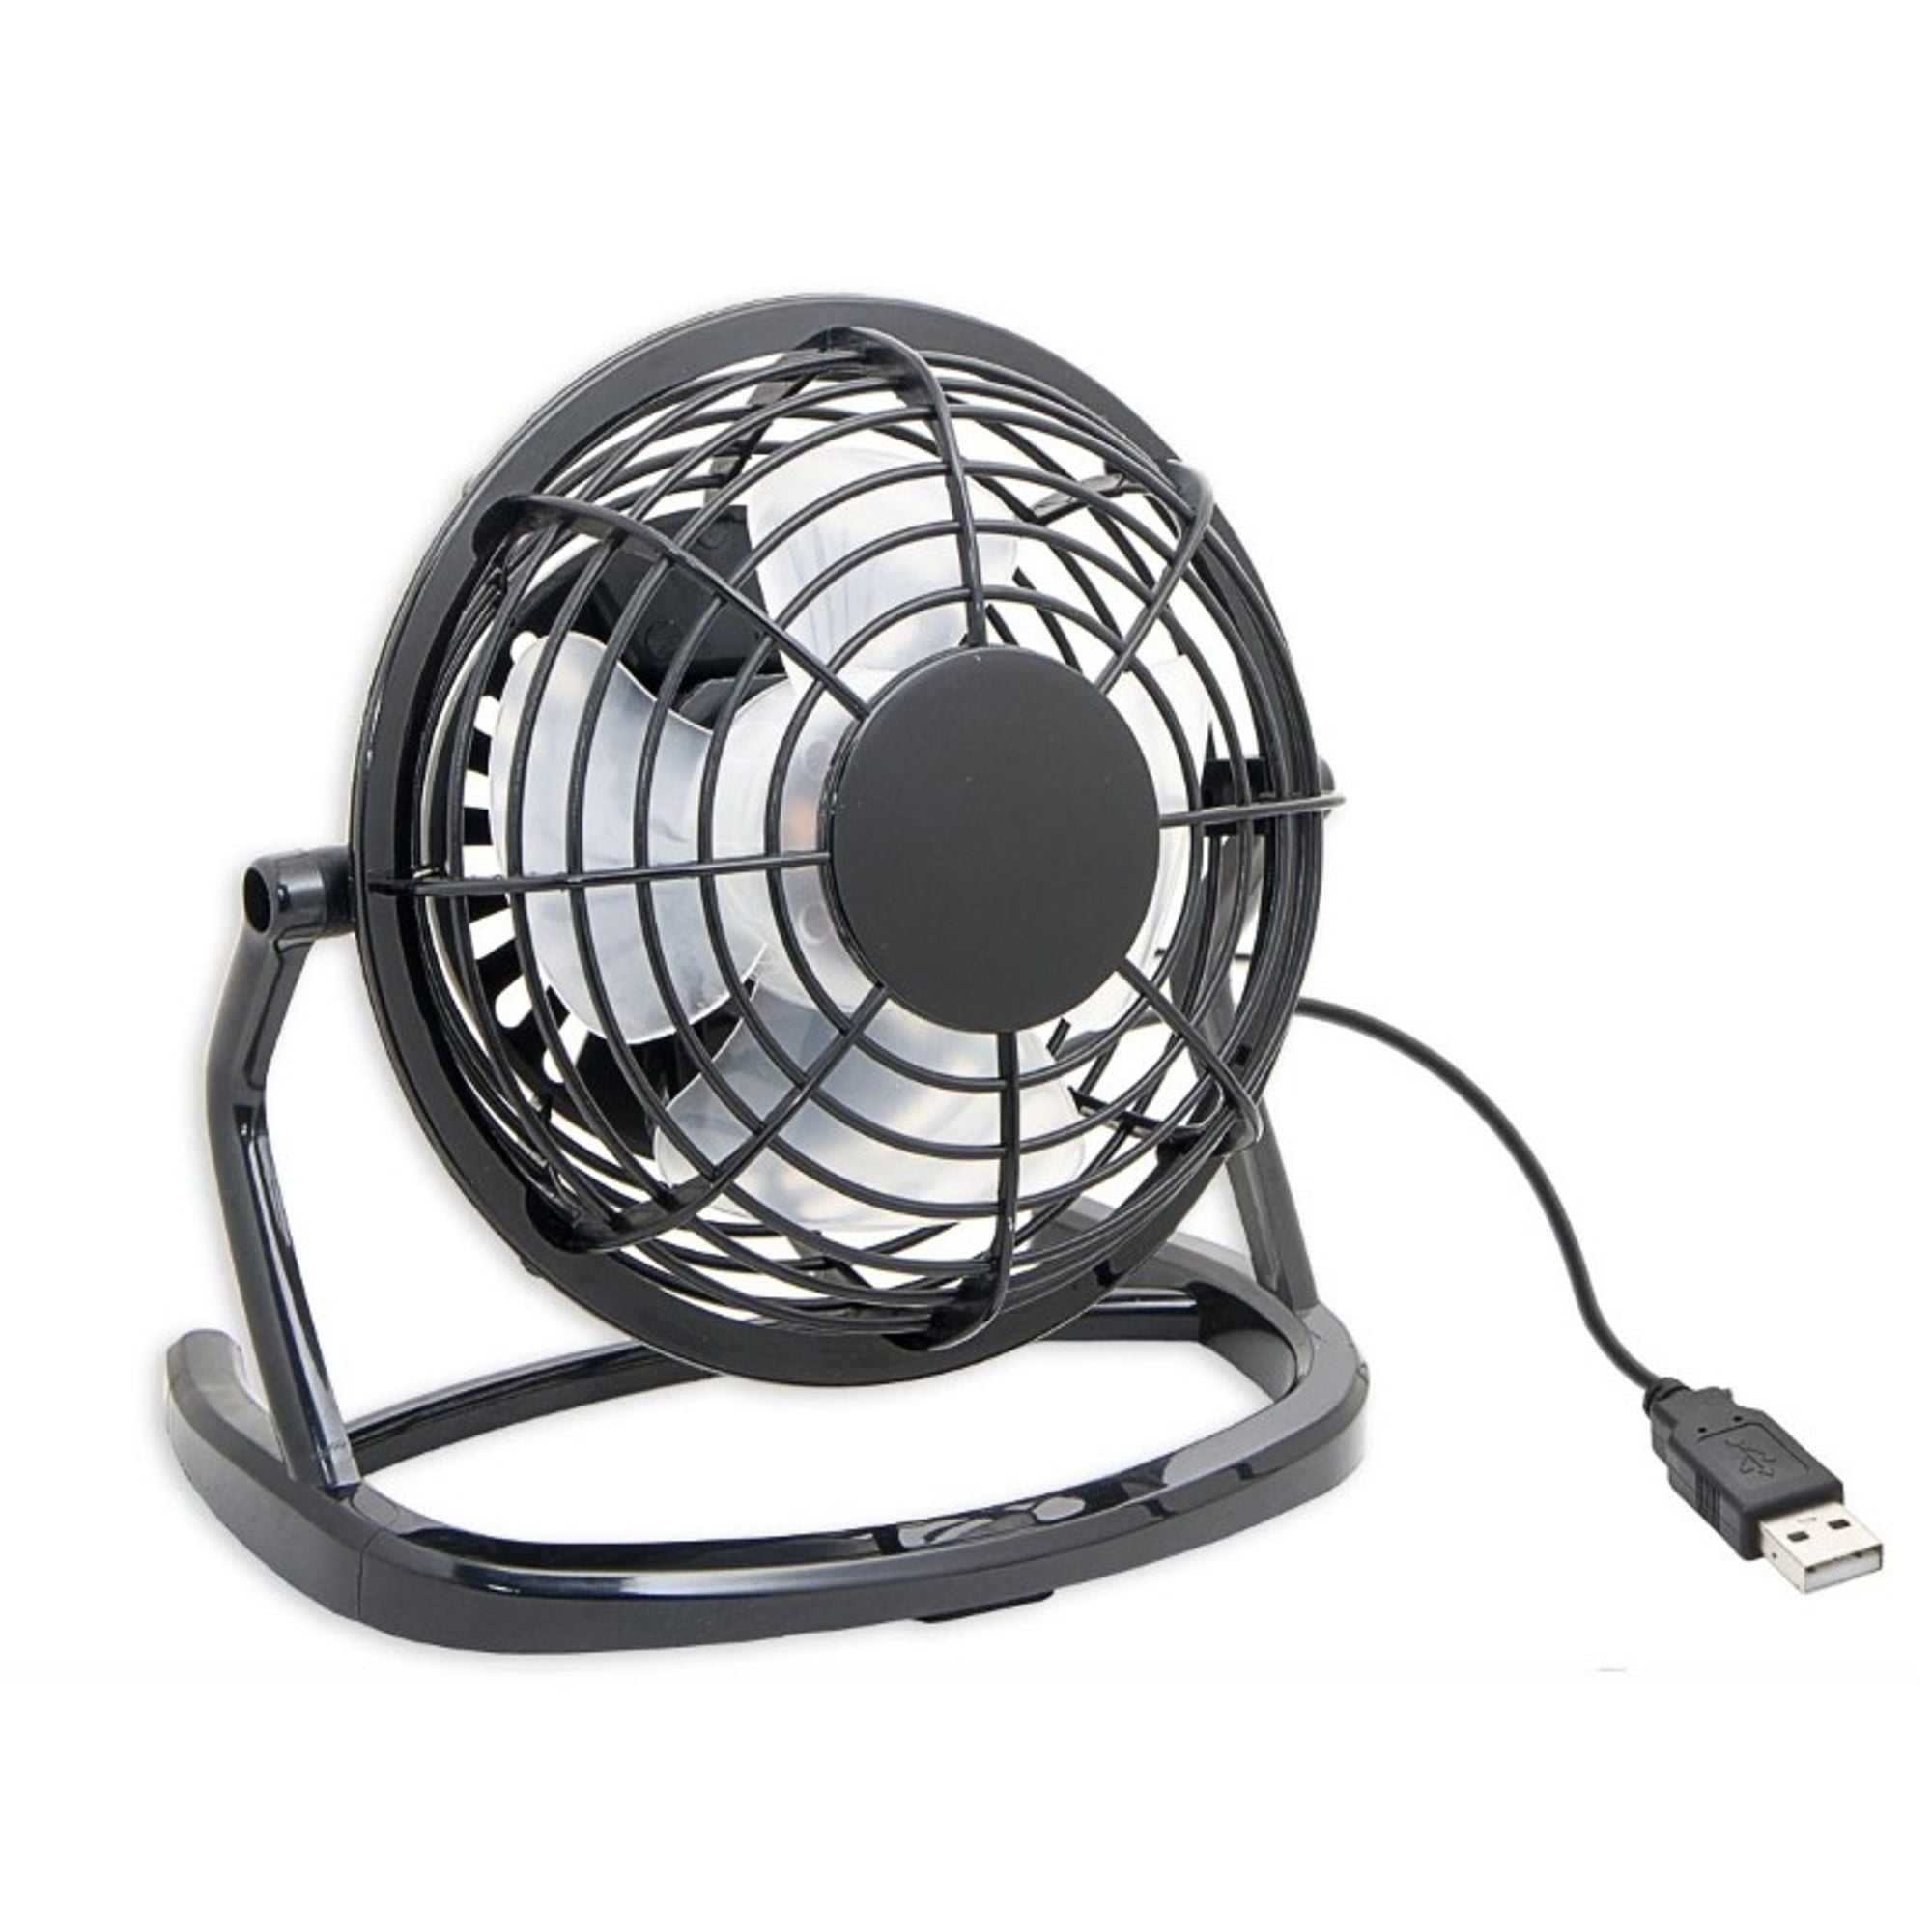 Color : Blue USB Table Desk Personal Fan Summer Rechargeable Portable Bees Small Fans Mute Quiet Handheld Mine for Home Office Table